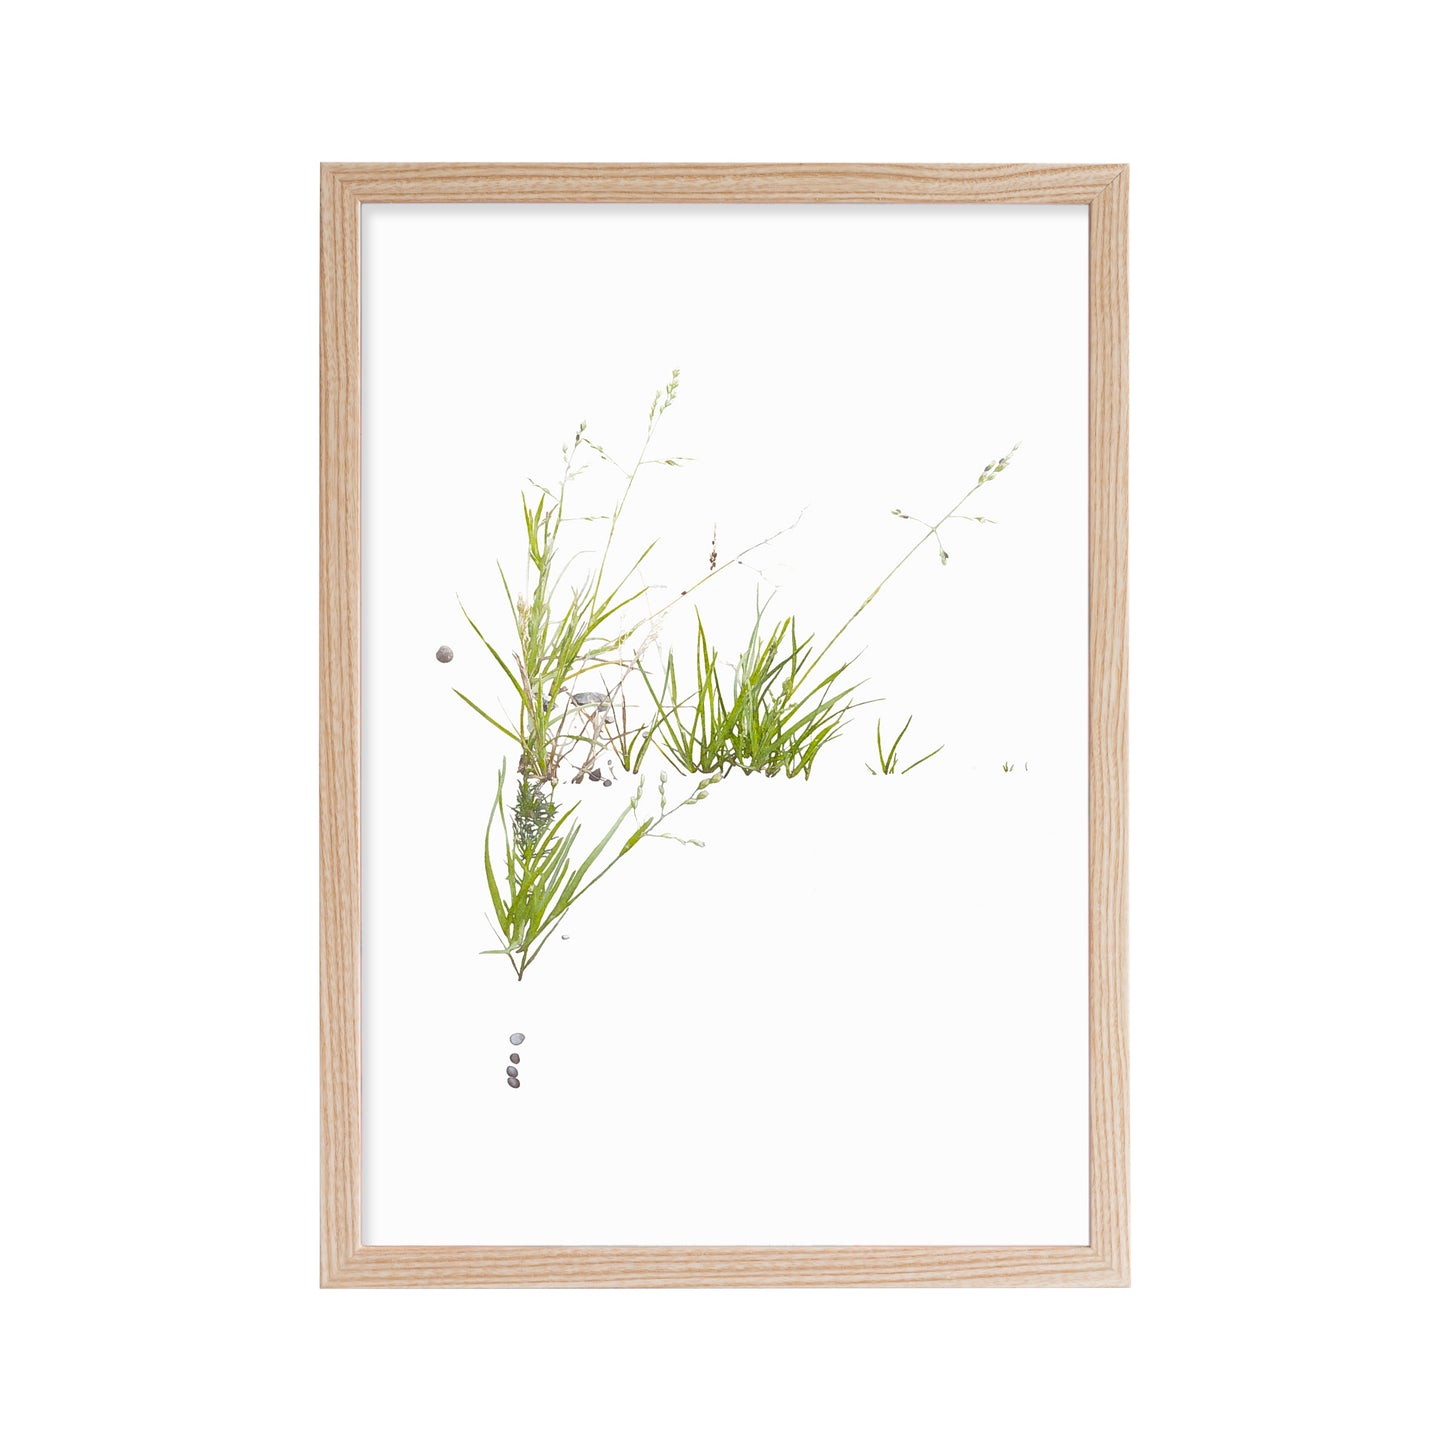 Printed reproduction of an image of Meadow Grass against a white background in ash frame